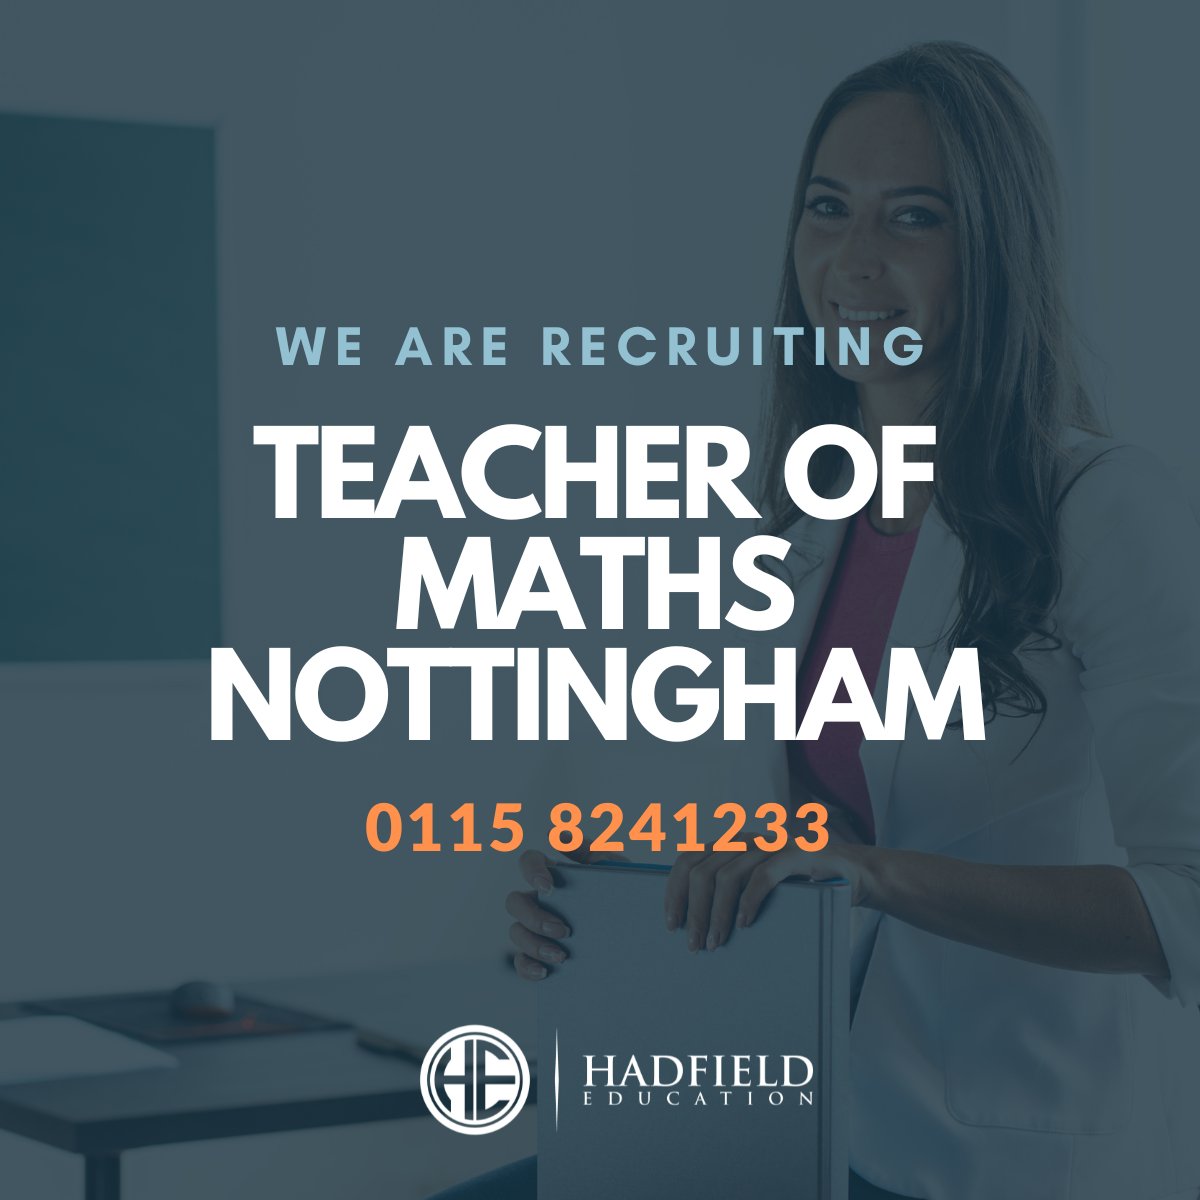 Currently recruiting for a teacher of Maths in Nottingham. Apply now

bit.ly/3OS5WYX  

#MathematicsTeachingJob
#SecondaryMathematicsTeachingJob
#SupplyTeachingJob
#MathematicsSupplyTeachingJobNottingham
#MathsSupplyTeachingJobs